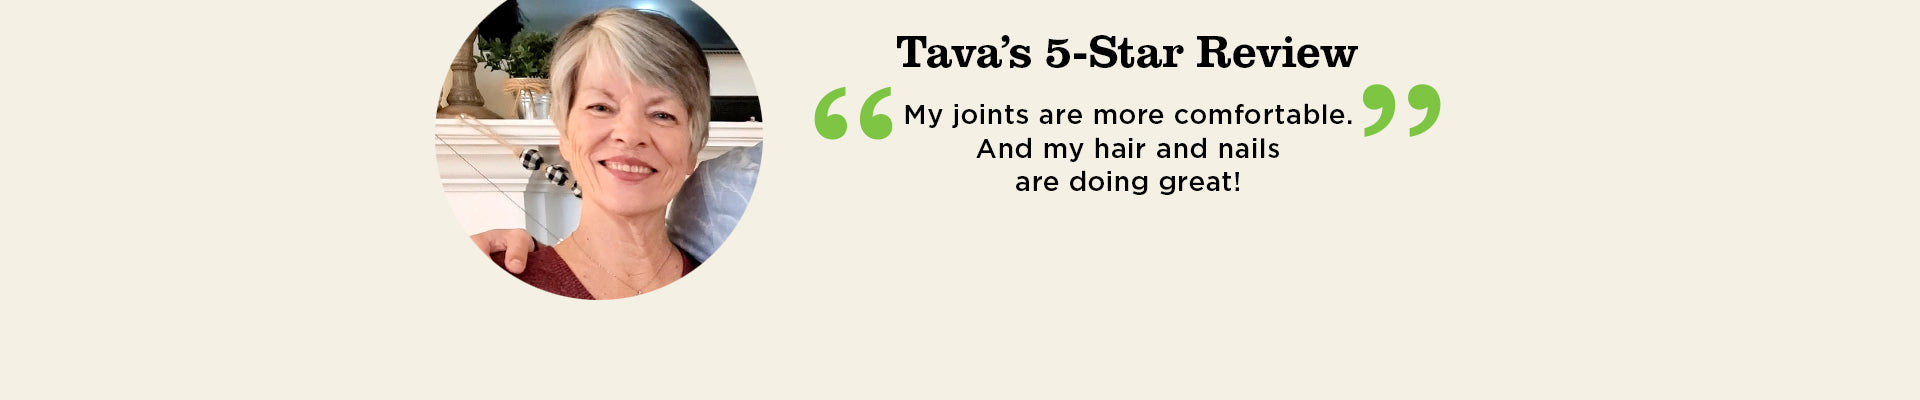 Why Customers Love NatureWise Enhanced Collagen Peptides: Tava’s 5-Star Review